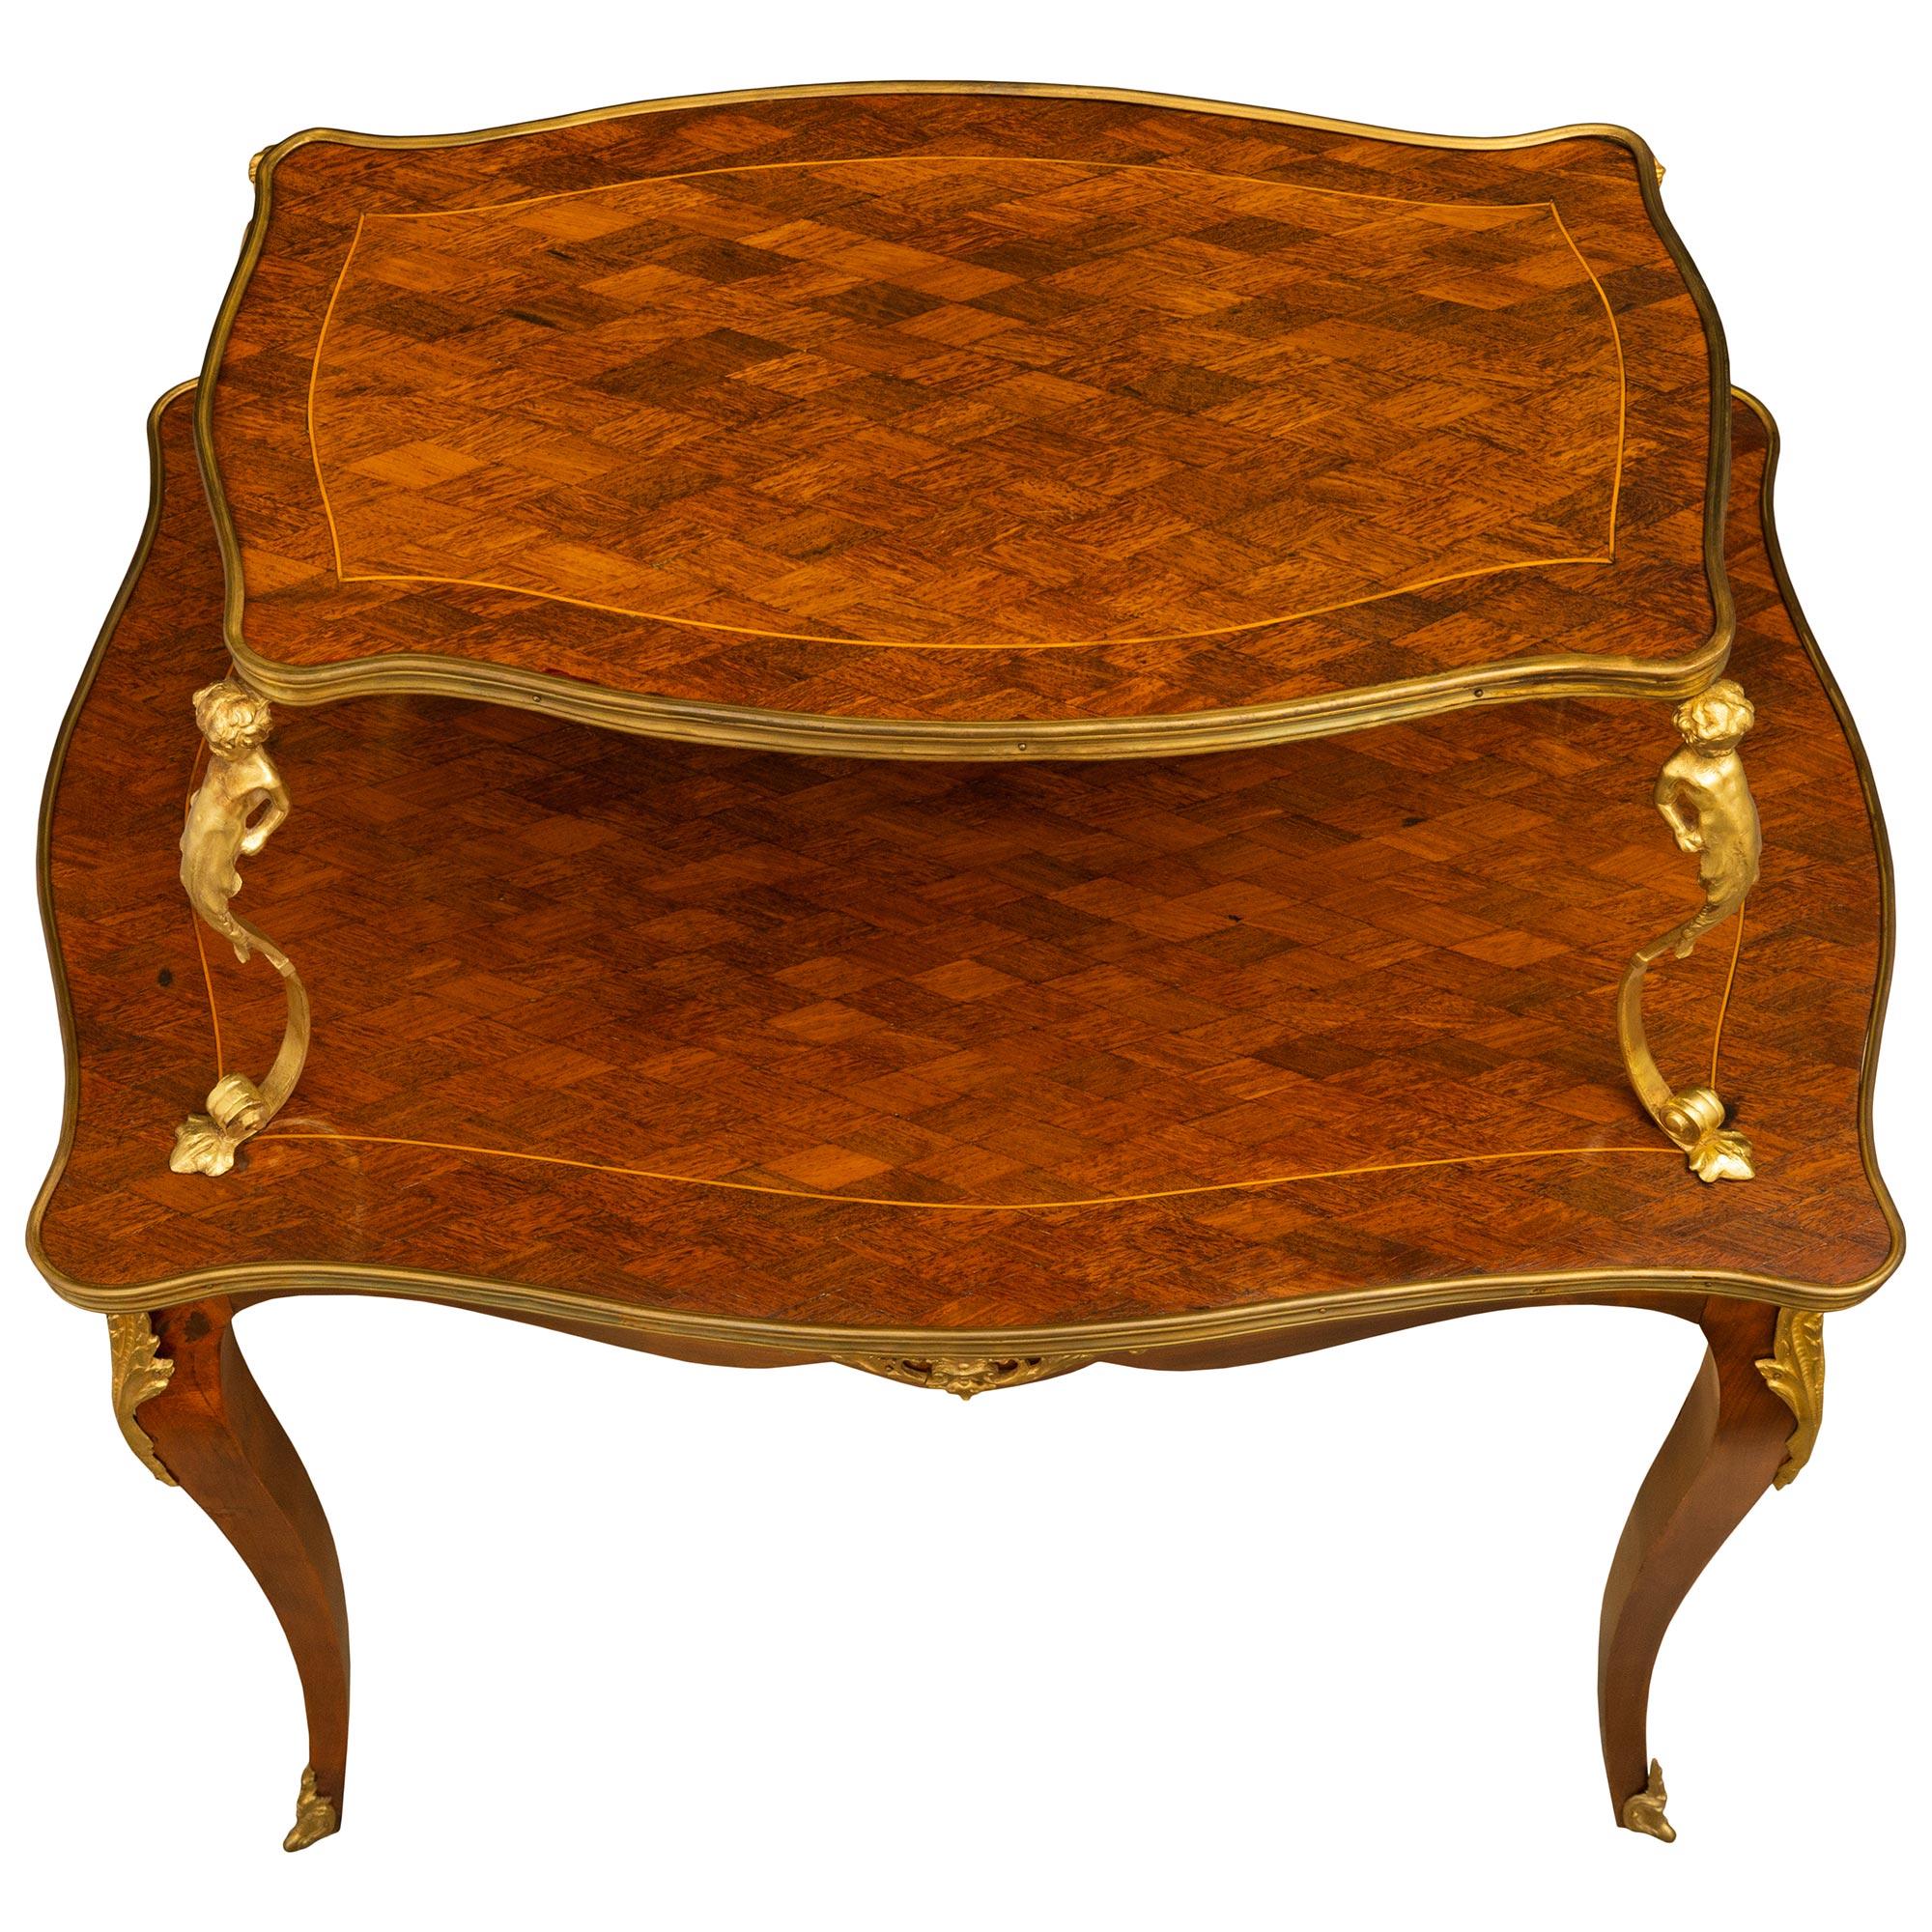 A French 19th century Louis XV style two-tier mahogany and ormolu serving table. The table is raised on cabriole legs with ormolu sabots and top ormolu mounts. A parquetry lattice design decorated the top of each surface with four ormolu cherubs